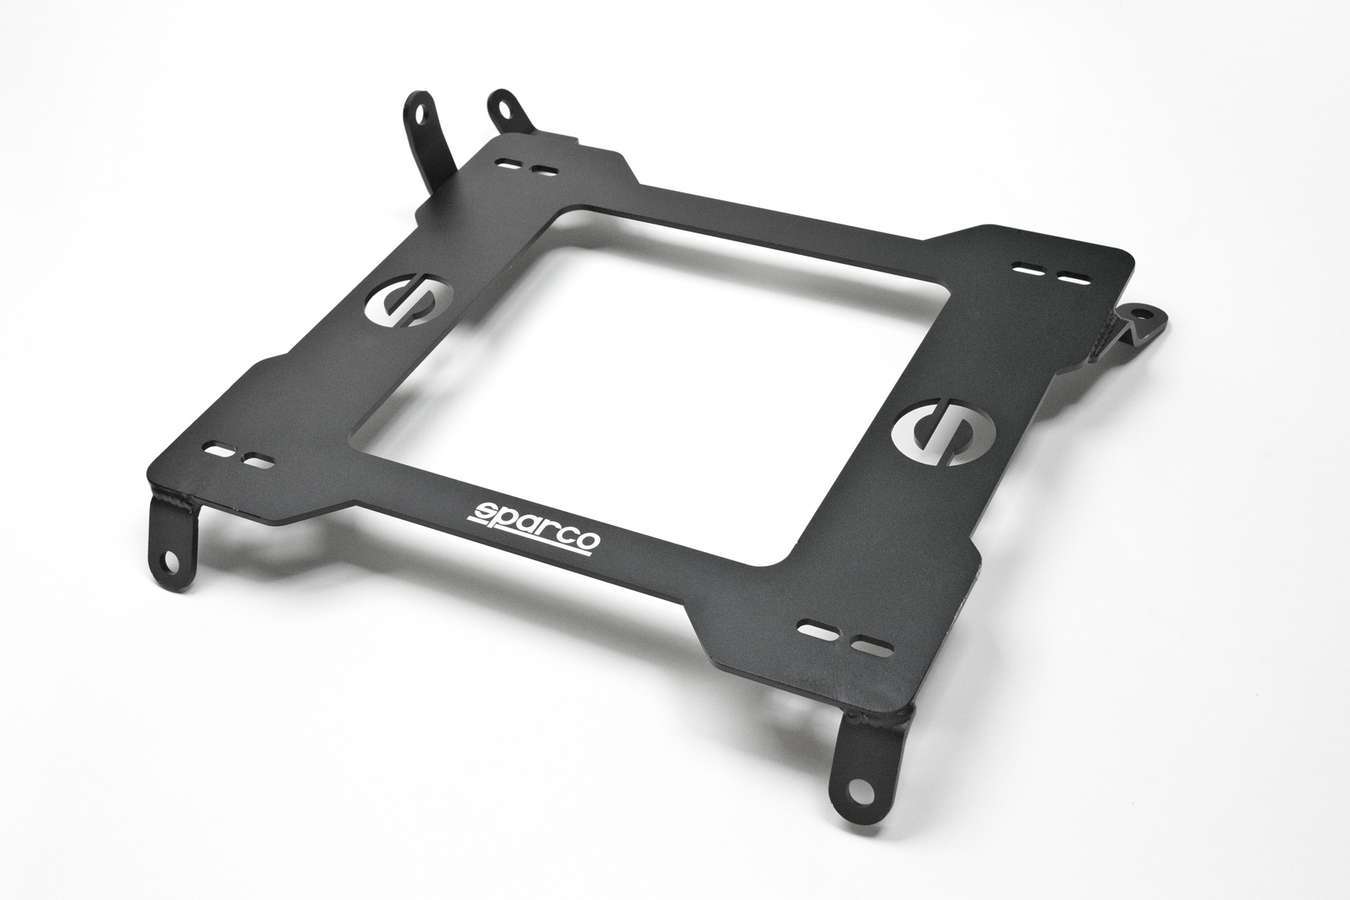 Sparco 600SB010R - Seat Adapter Bracket, 600 Series, Sparco to Passenger Side Ford Mustang 1979-98, Steel, Black Powder Coat, Each